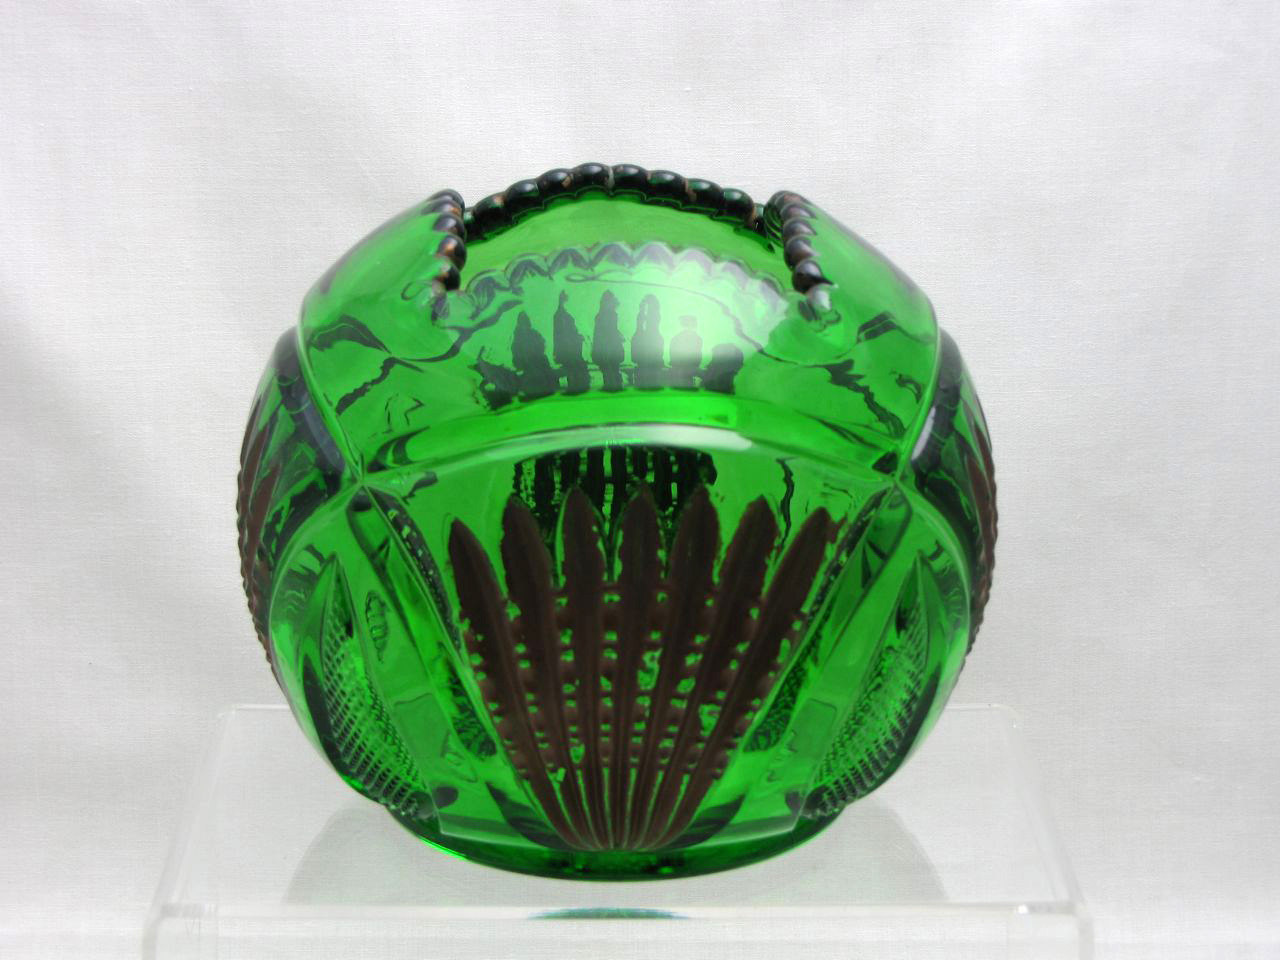 Heisey #1255 Pineapple and Fan, Rose Bowl, Emerald with gold decoration